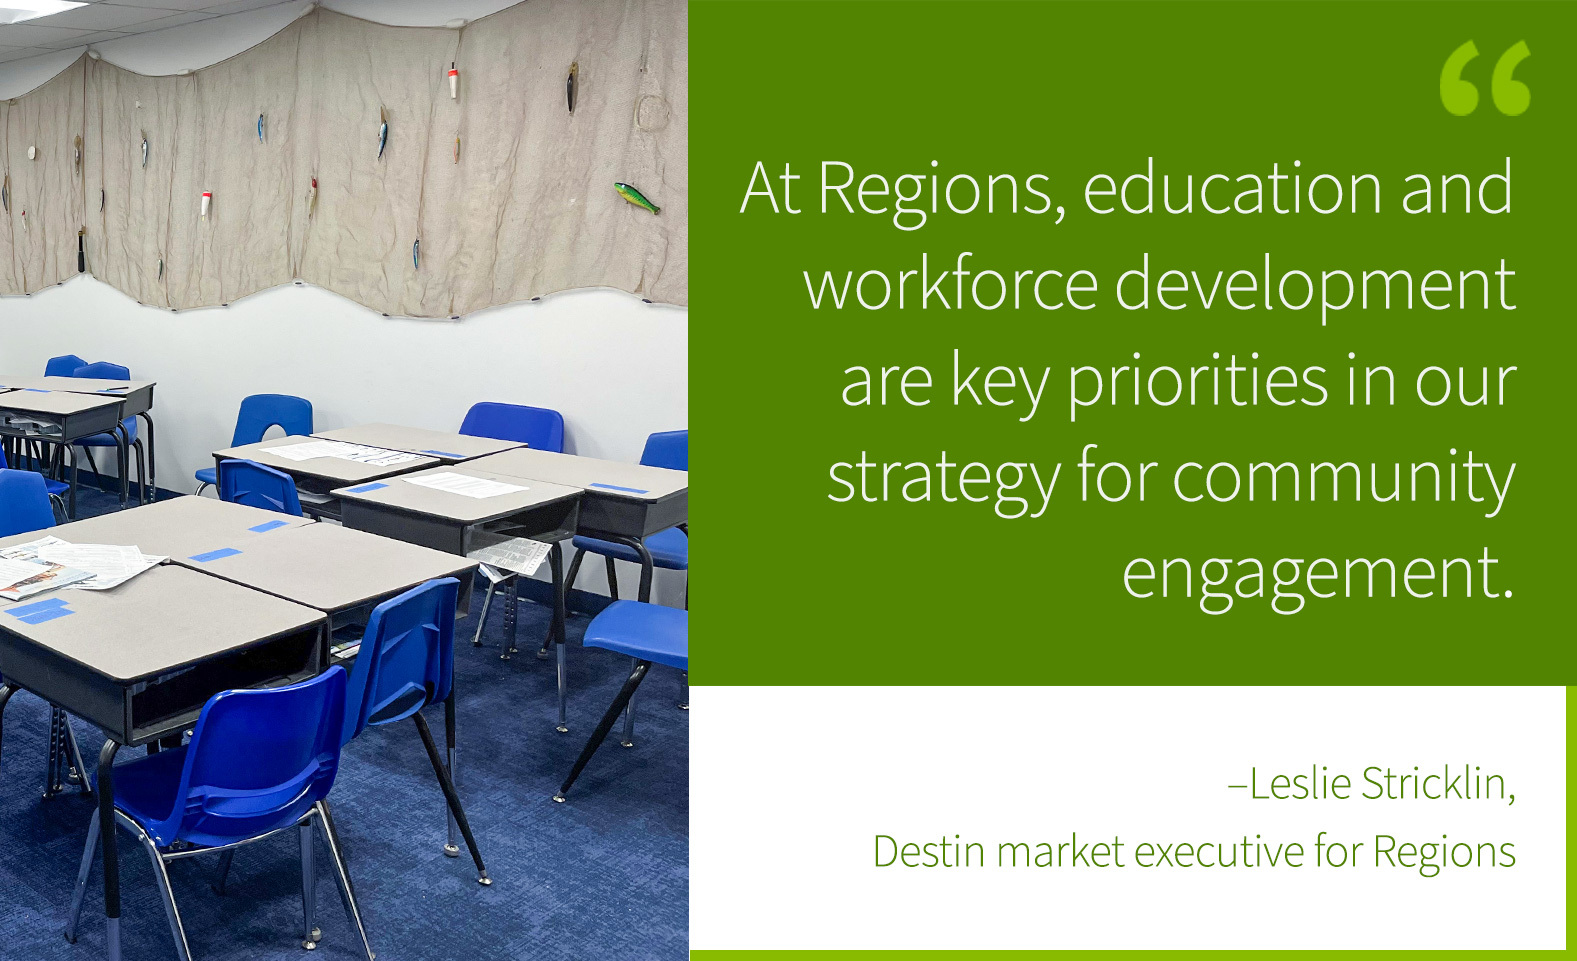 photo of classroom and quote that says, "At Regions, education and workforce development are key priorities in our strategy for community engagement."